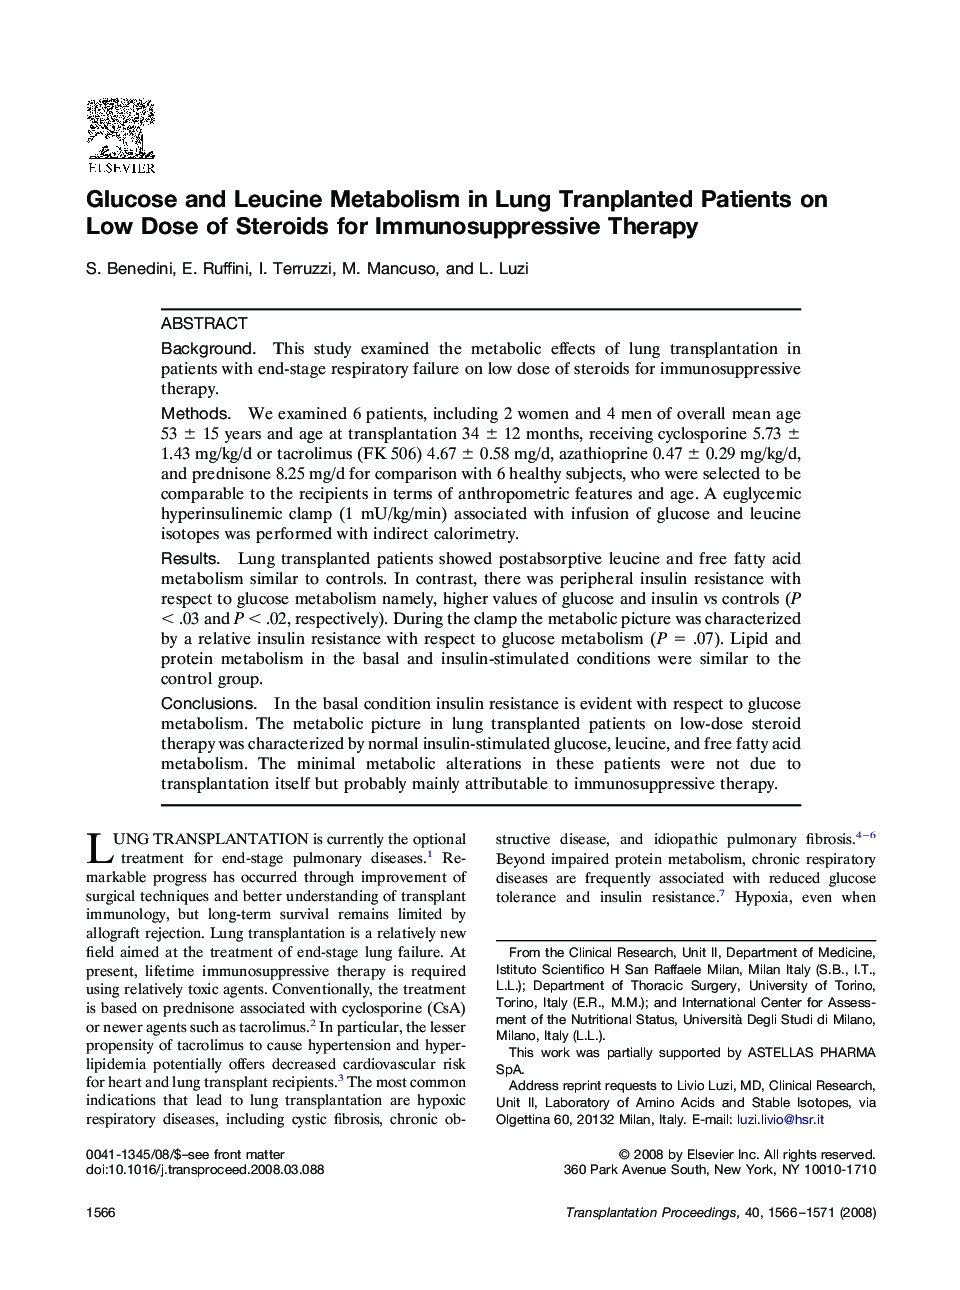 Glucose and Leucine Metabolism in Lung Tranplanted Patients on Low Dose of Steroids for Immunosuppressive Therapy